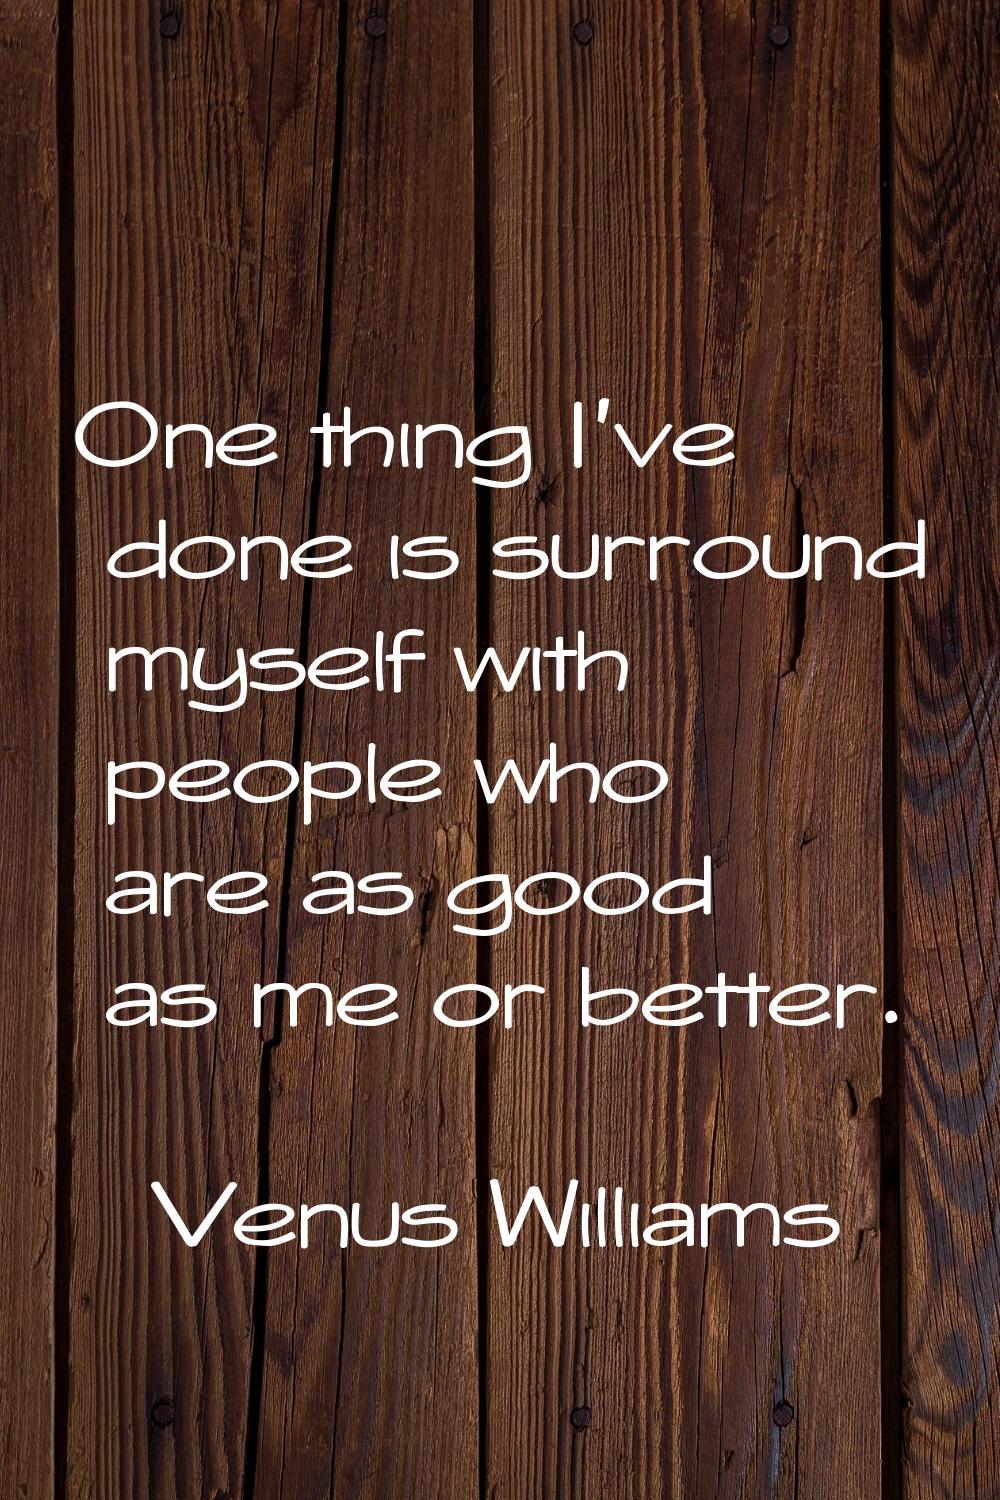 One thing I've done is surround myself with people who are as good as me or better.